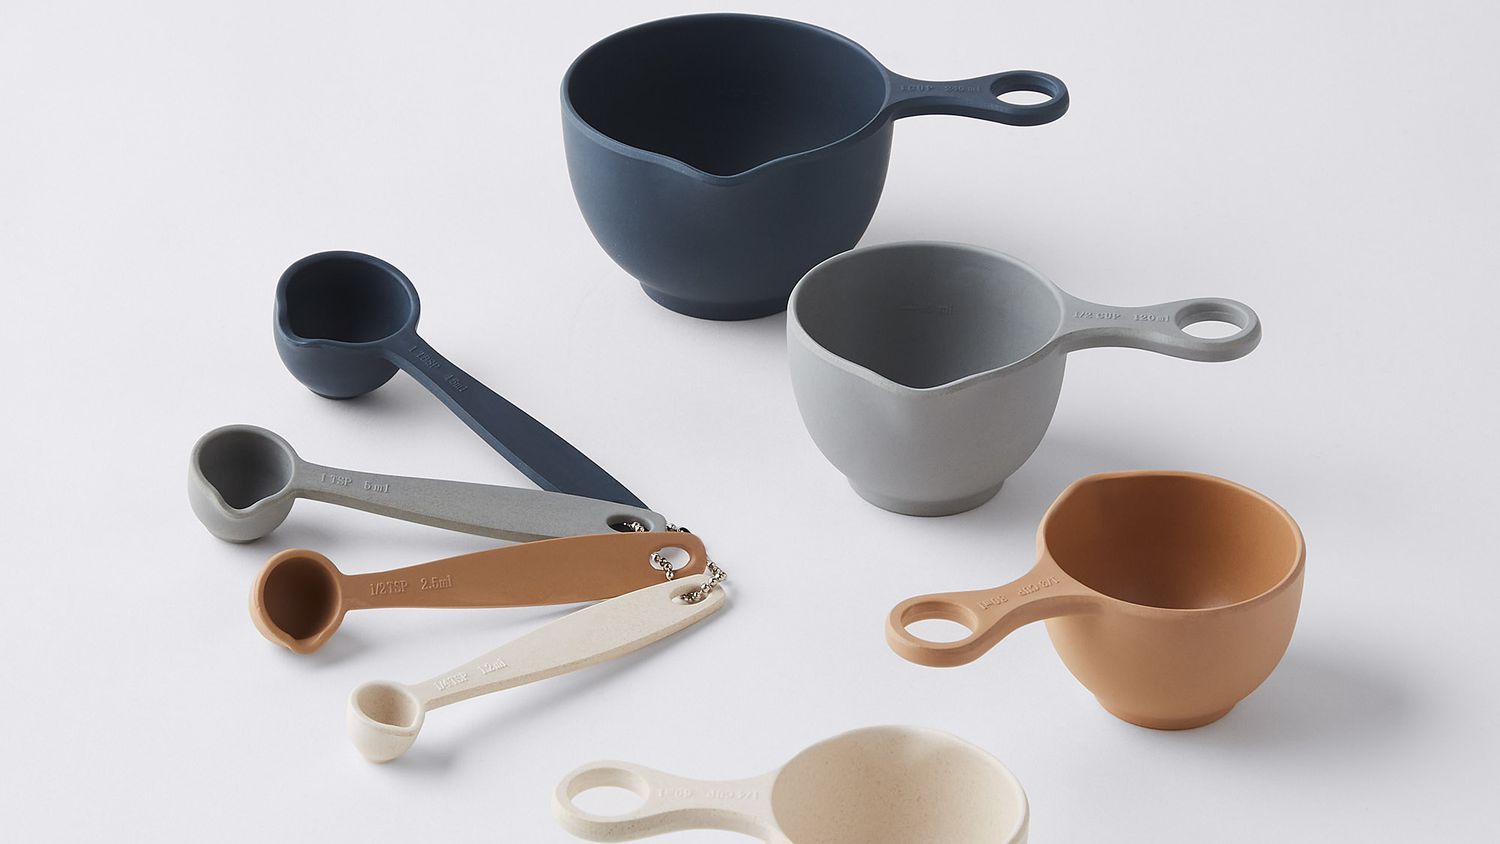 Pretty Measuring Cups and Spoons